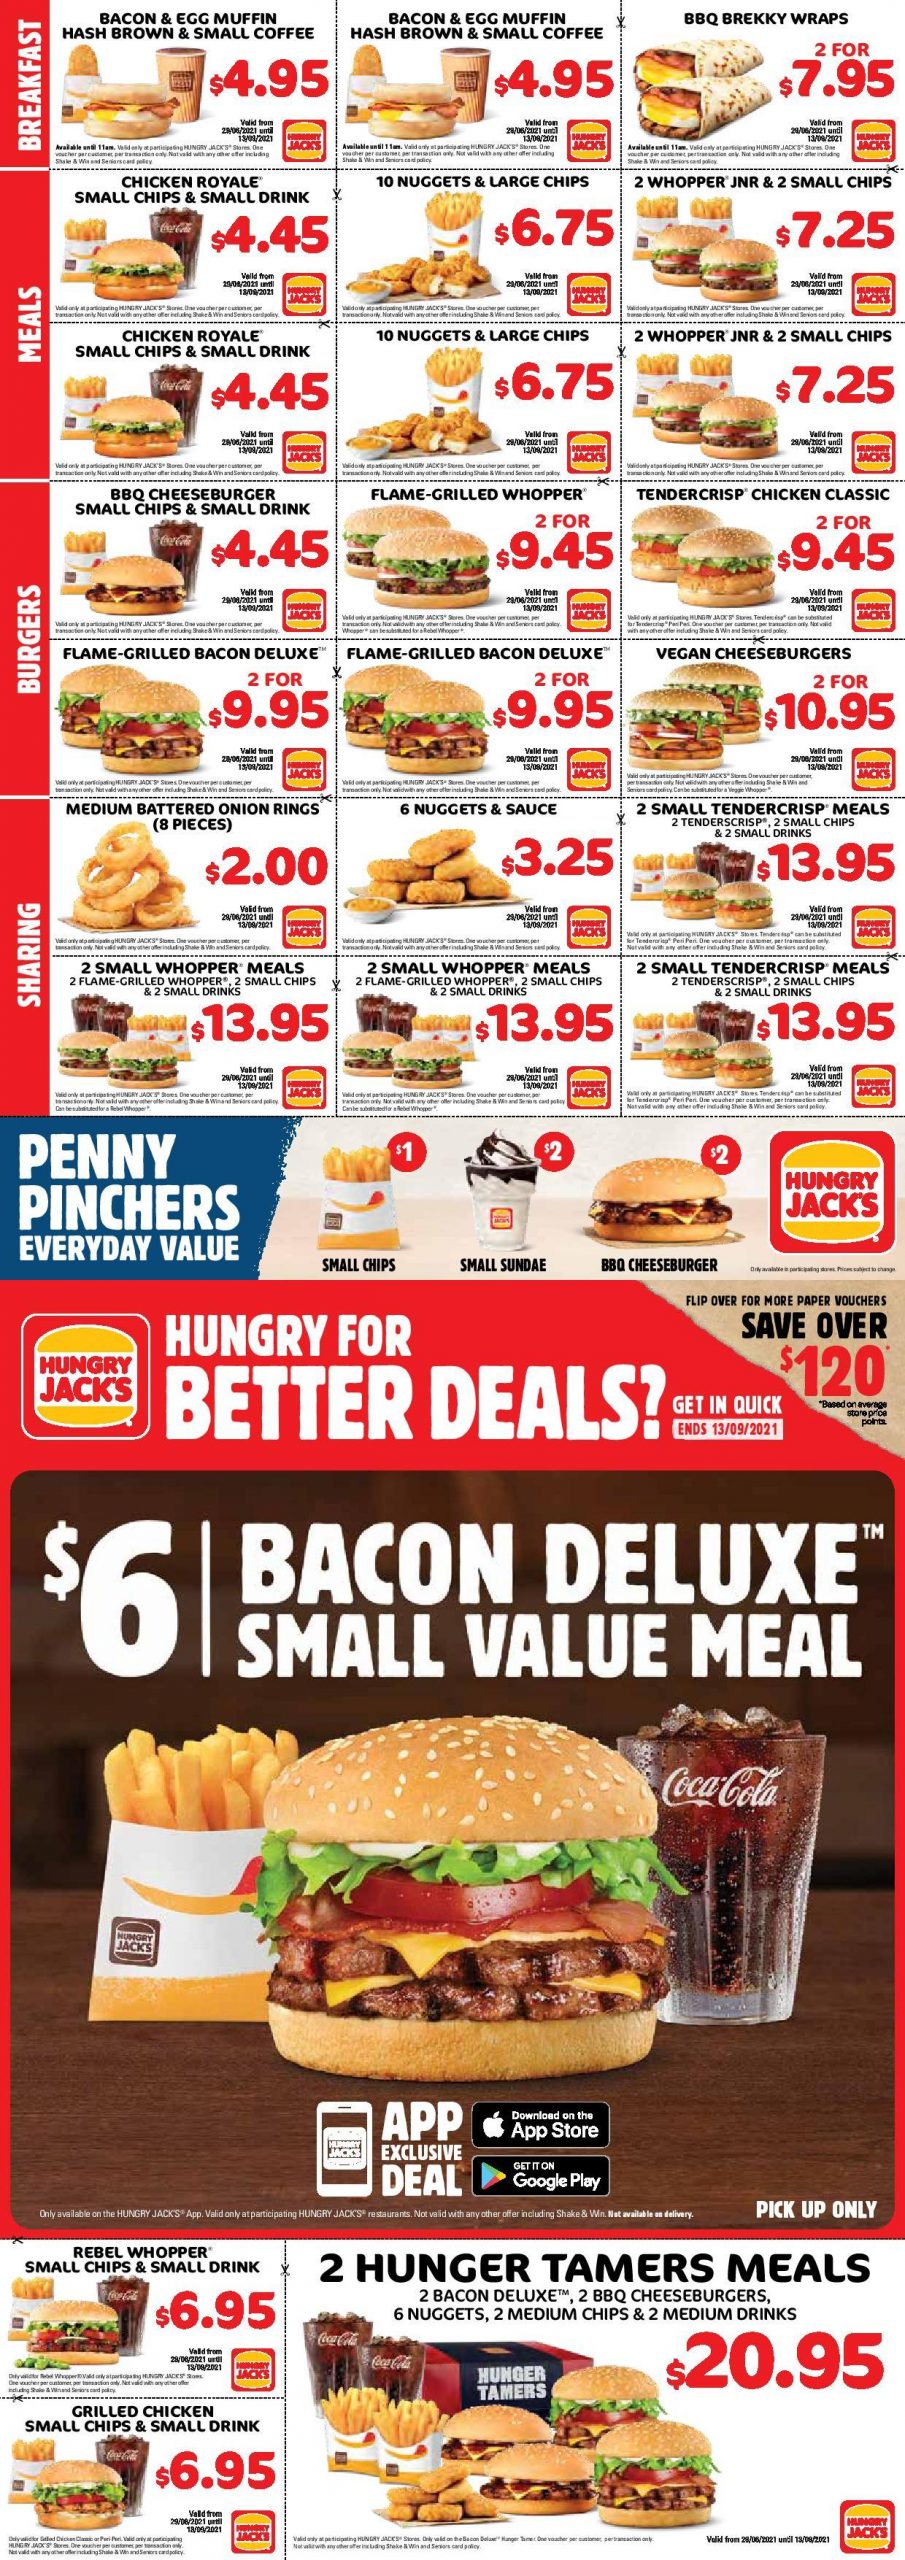 Hungry Jacks Vouchers / Coupons / Deals (April 2022) frugal feeds